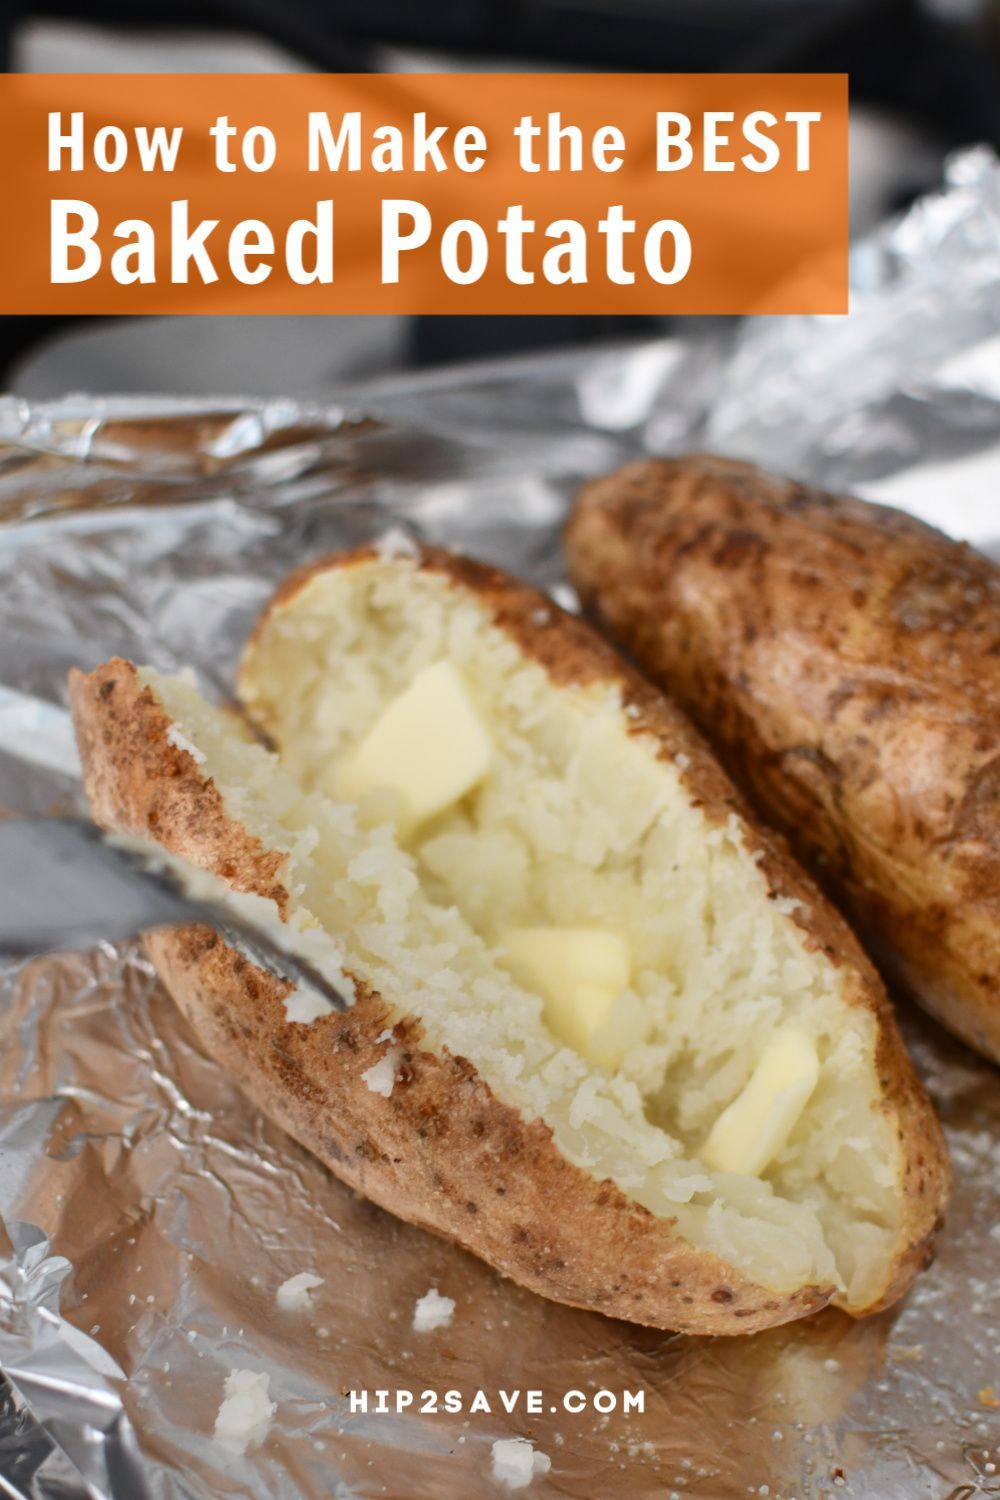 Here's How to Make the Best Baked Potatoes - Here's How to Make the Best Baked Potatoes -   19 diy Food potato ideas